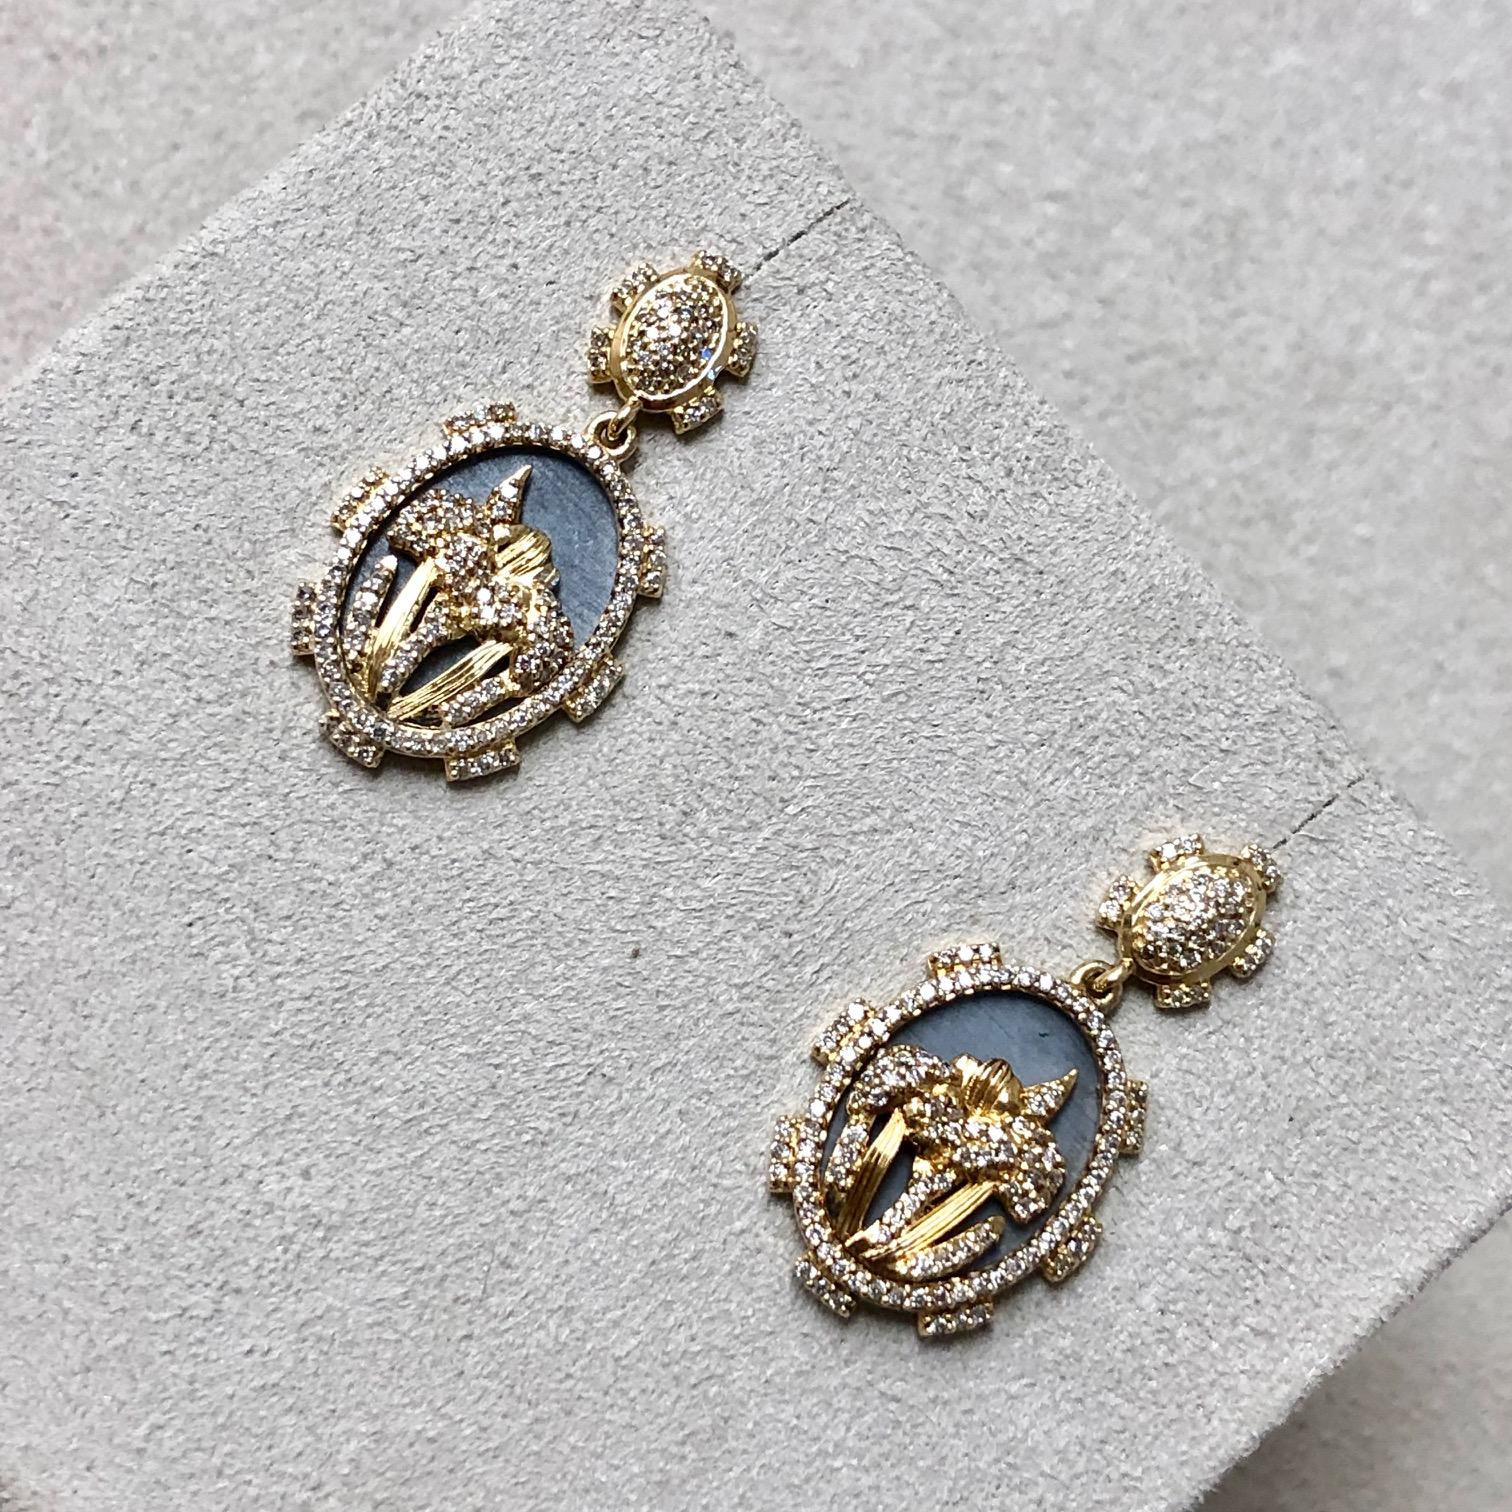 Syna Yellow Gold & Oxidized Silver Iris Flower Earrings with Champagne Diamonds 6